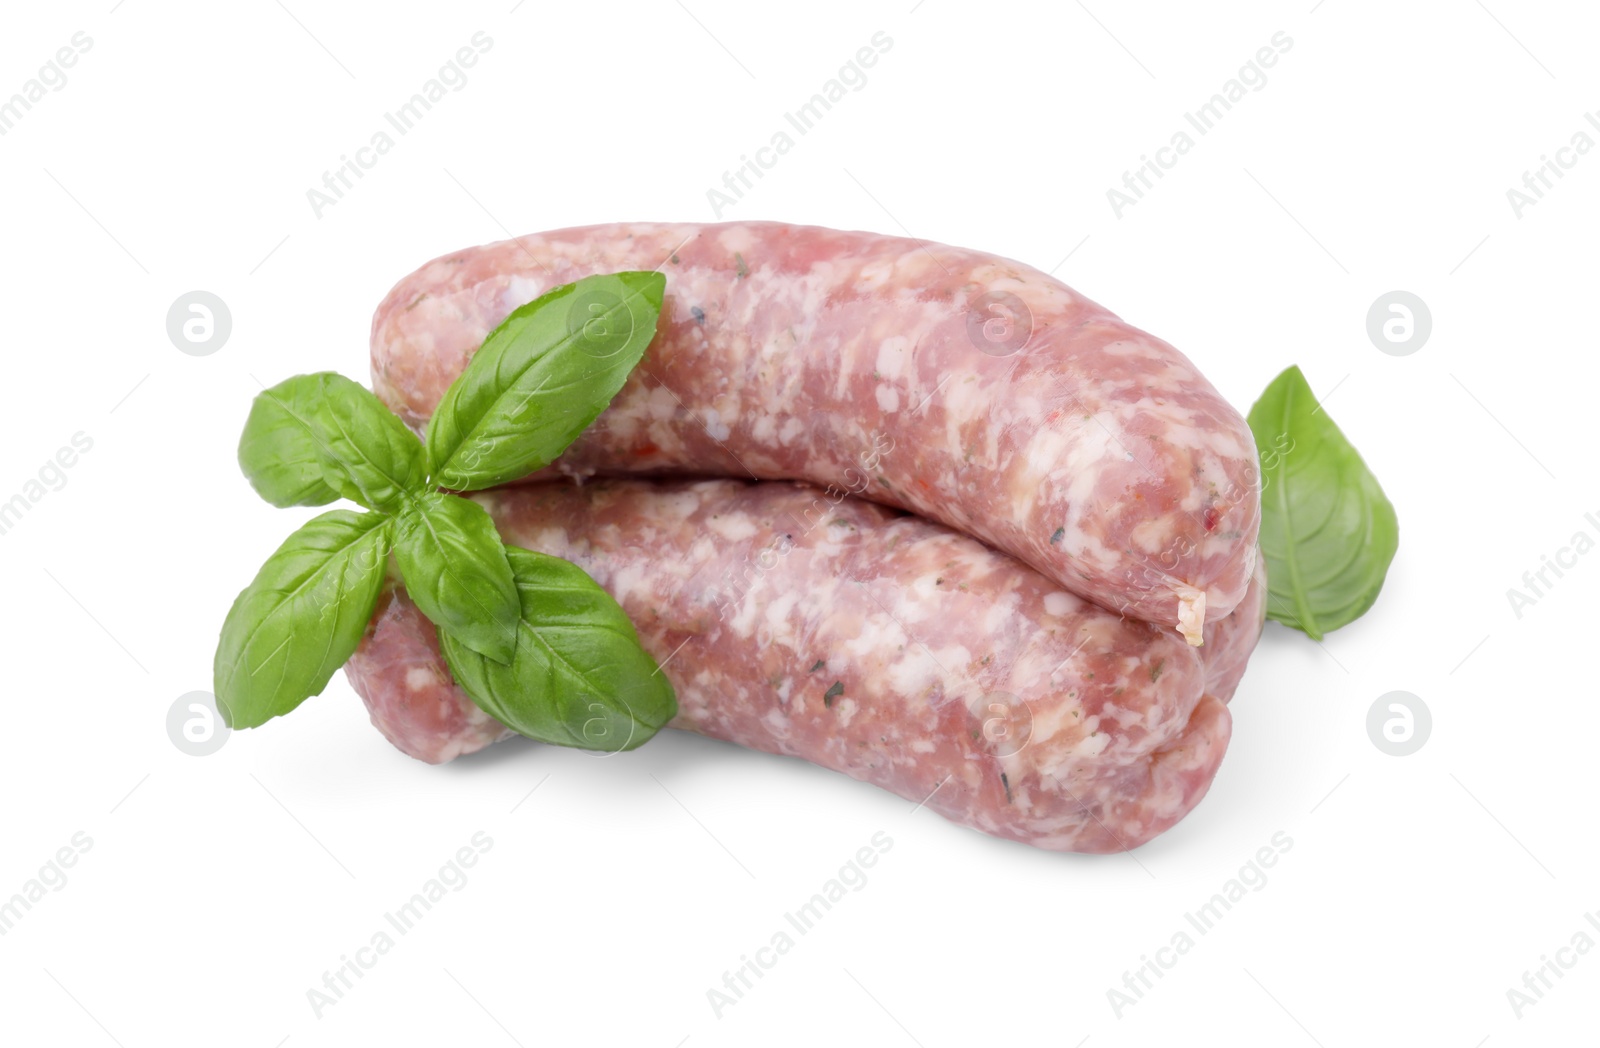 Photo of Raw homemade sausages and basil leaves isolated on white